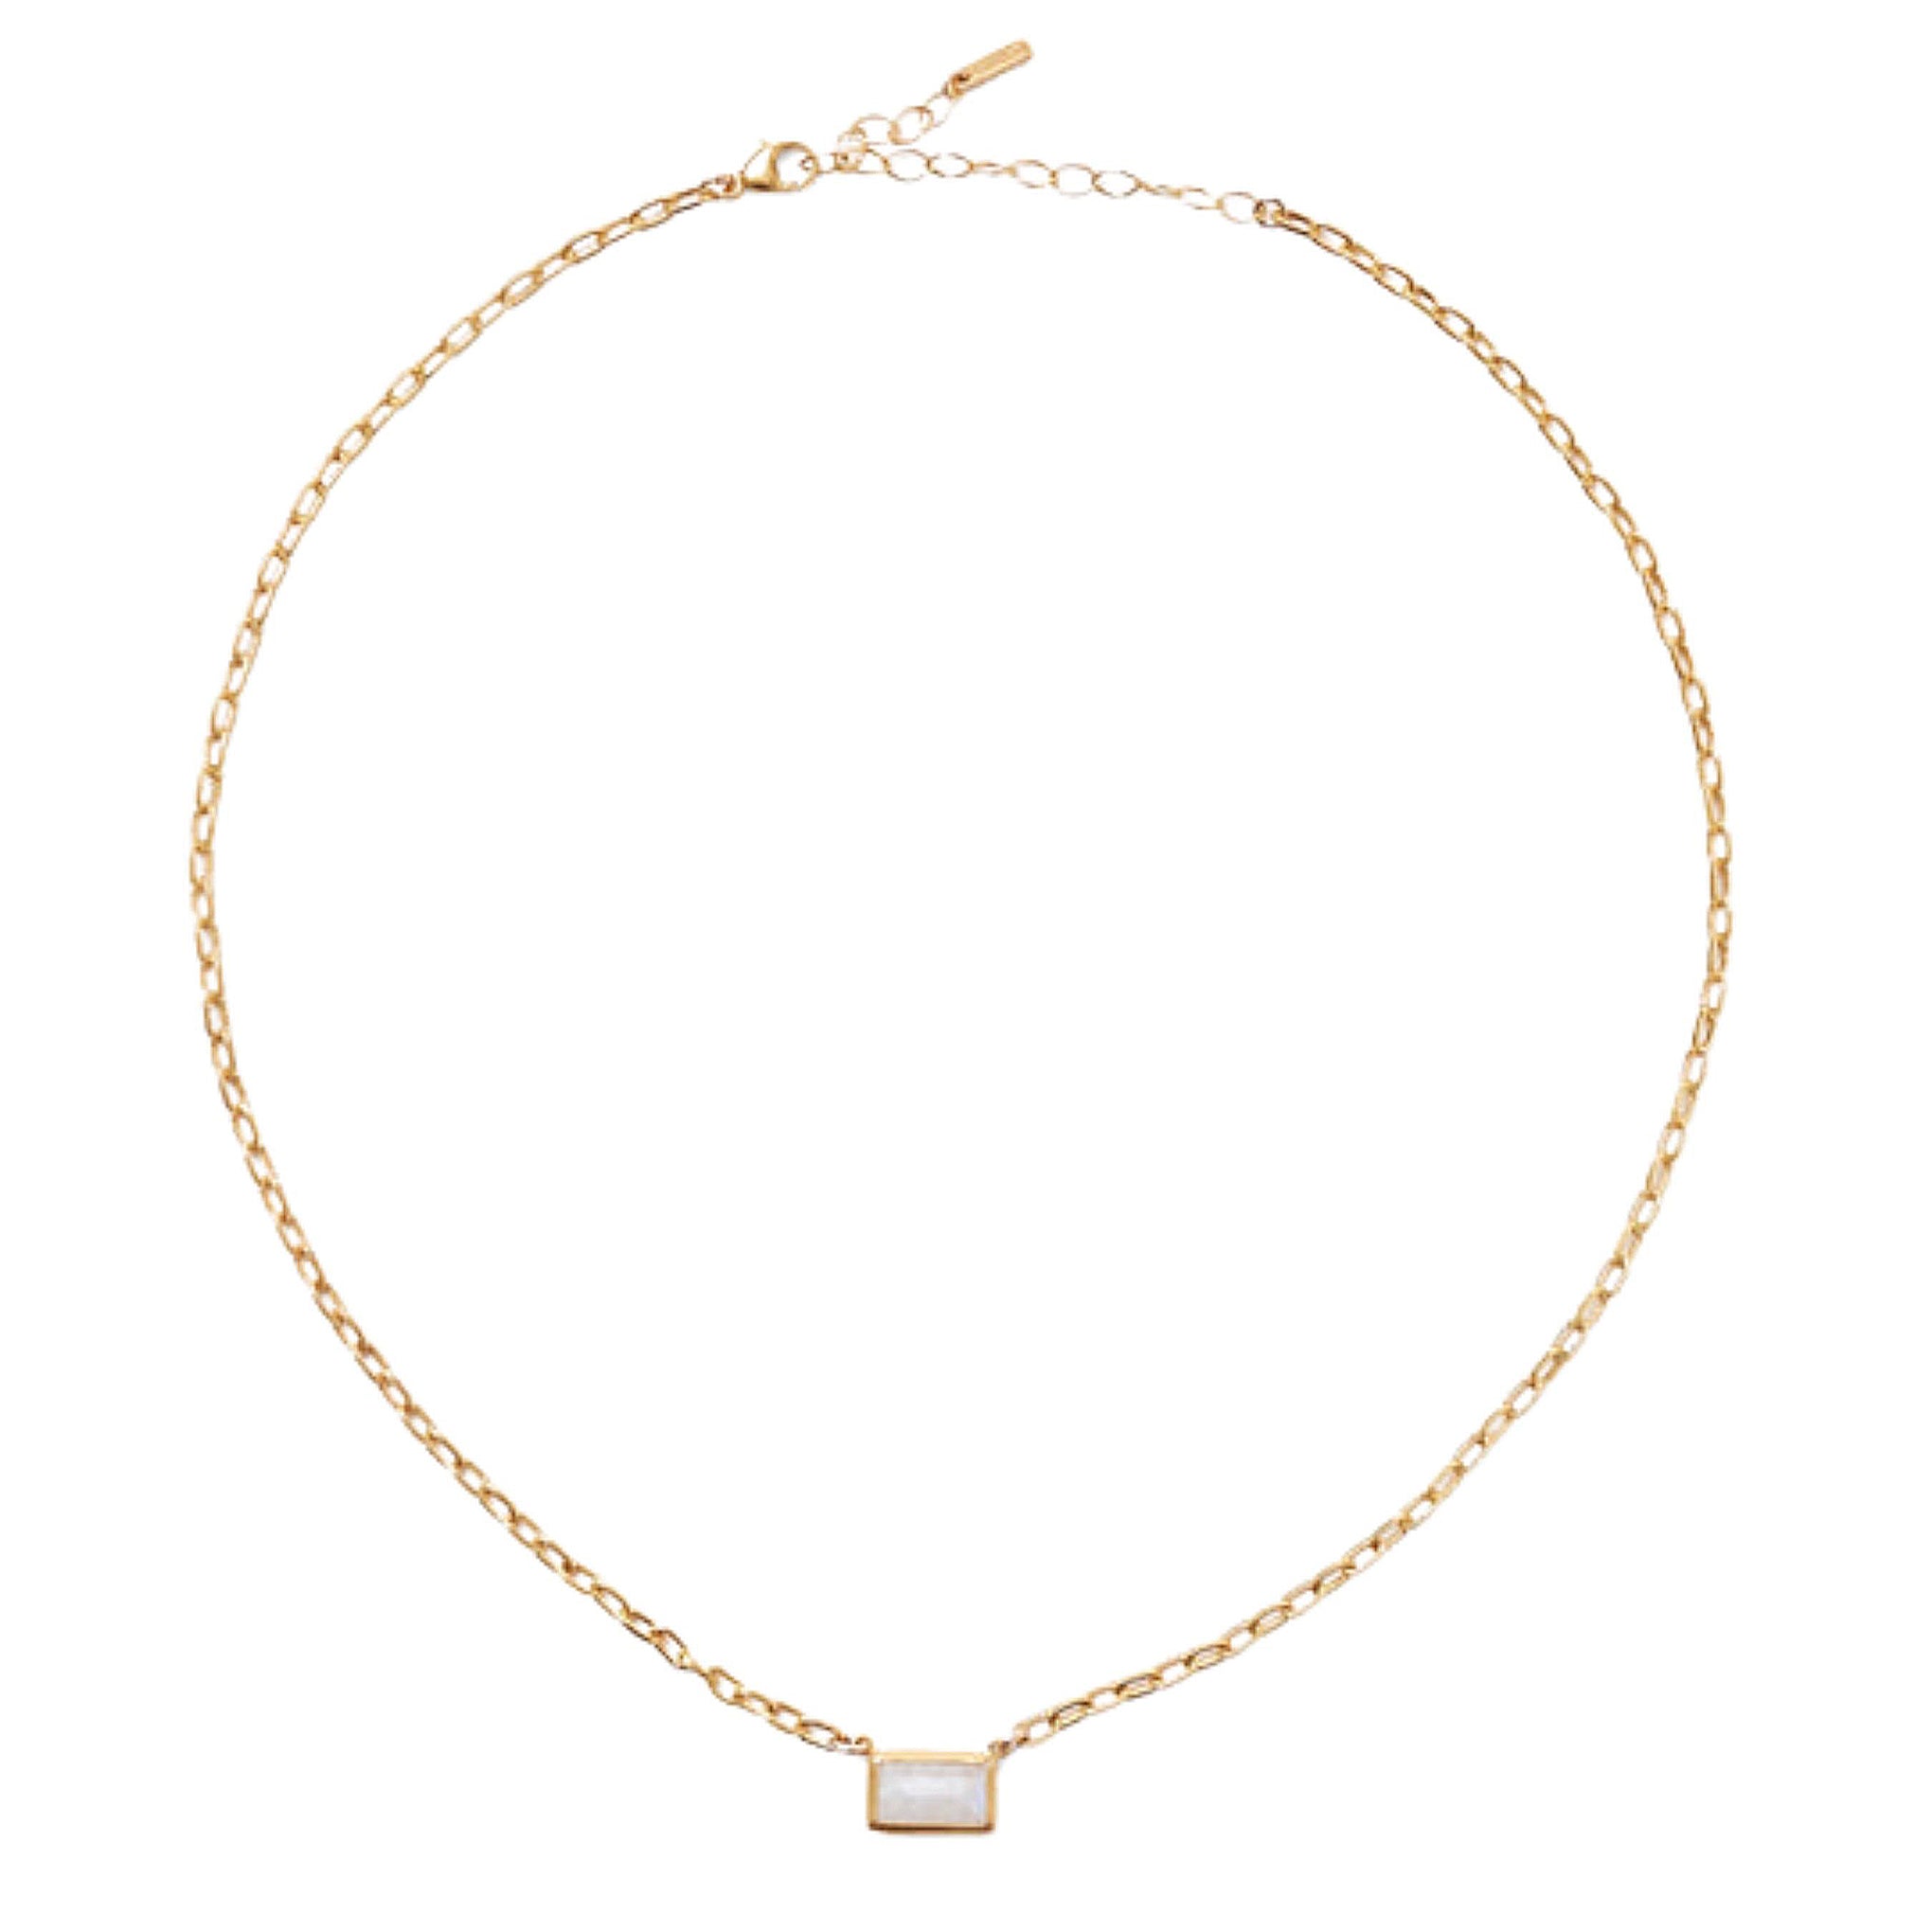 Chan Luu Rectangle Tab Pendant Necklace in Moonstone and Gold